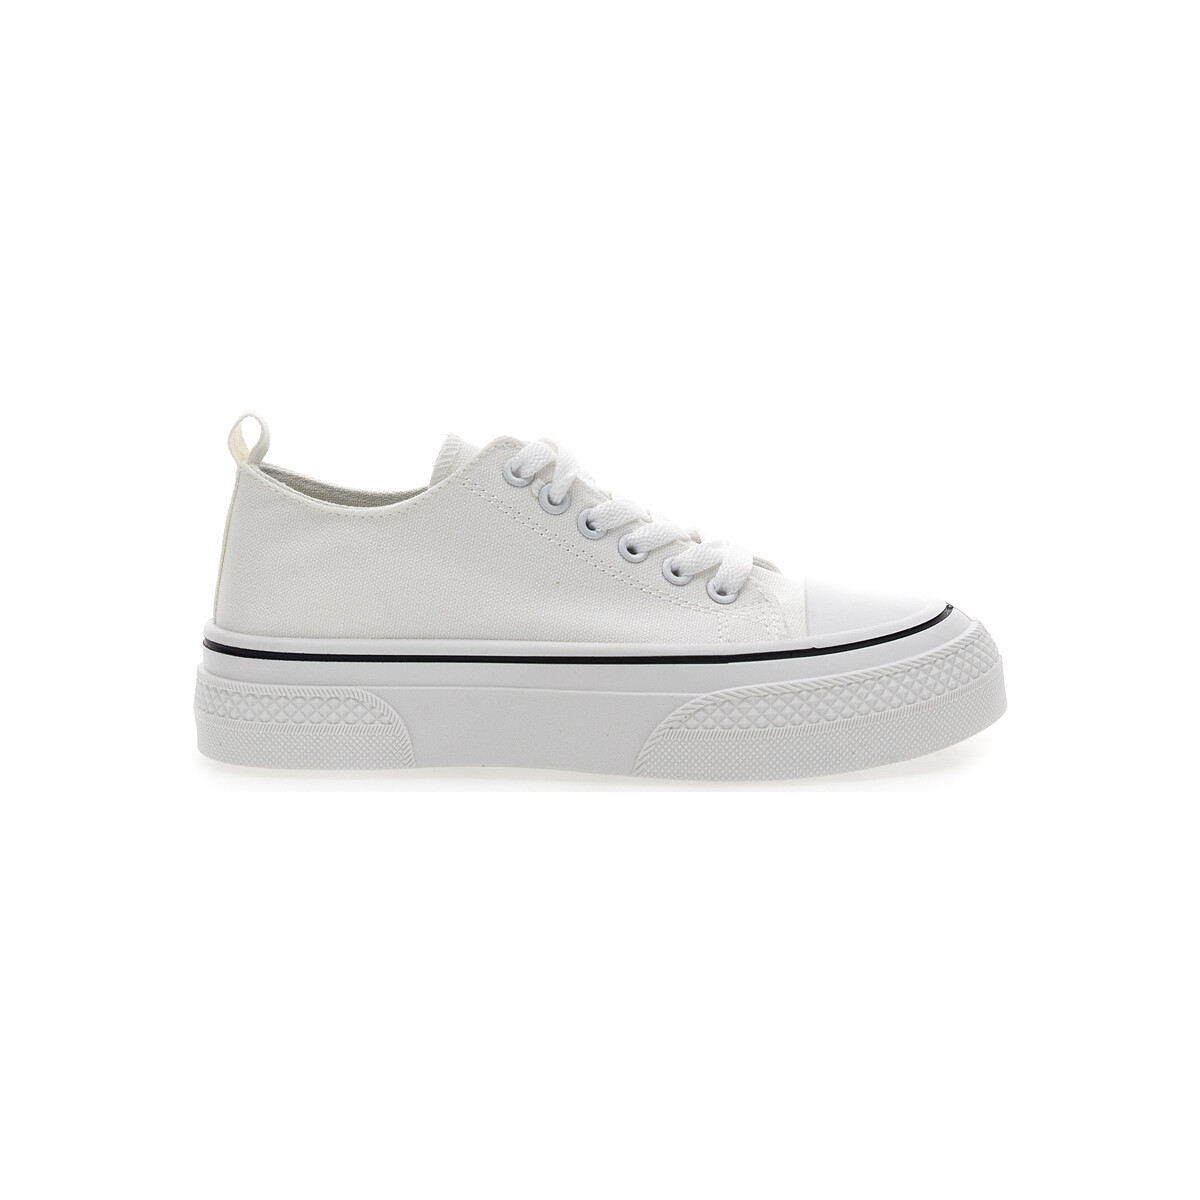 Scarpe Donna Sneakers Cafe' Cost 211 Bianco